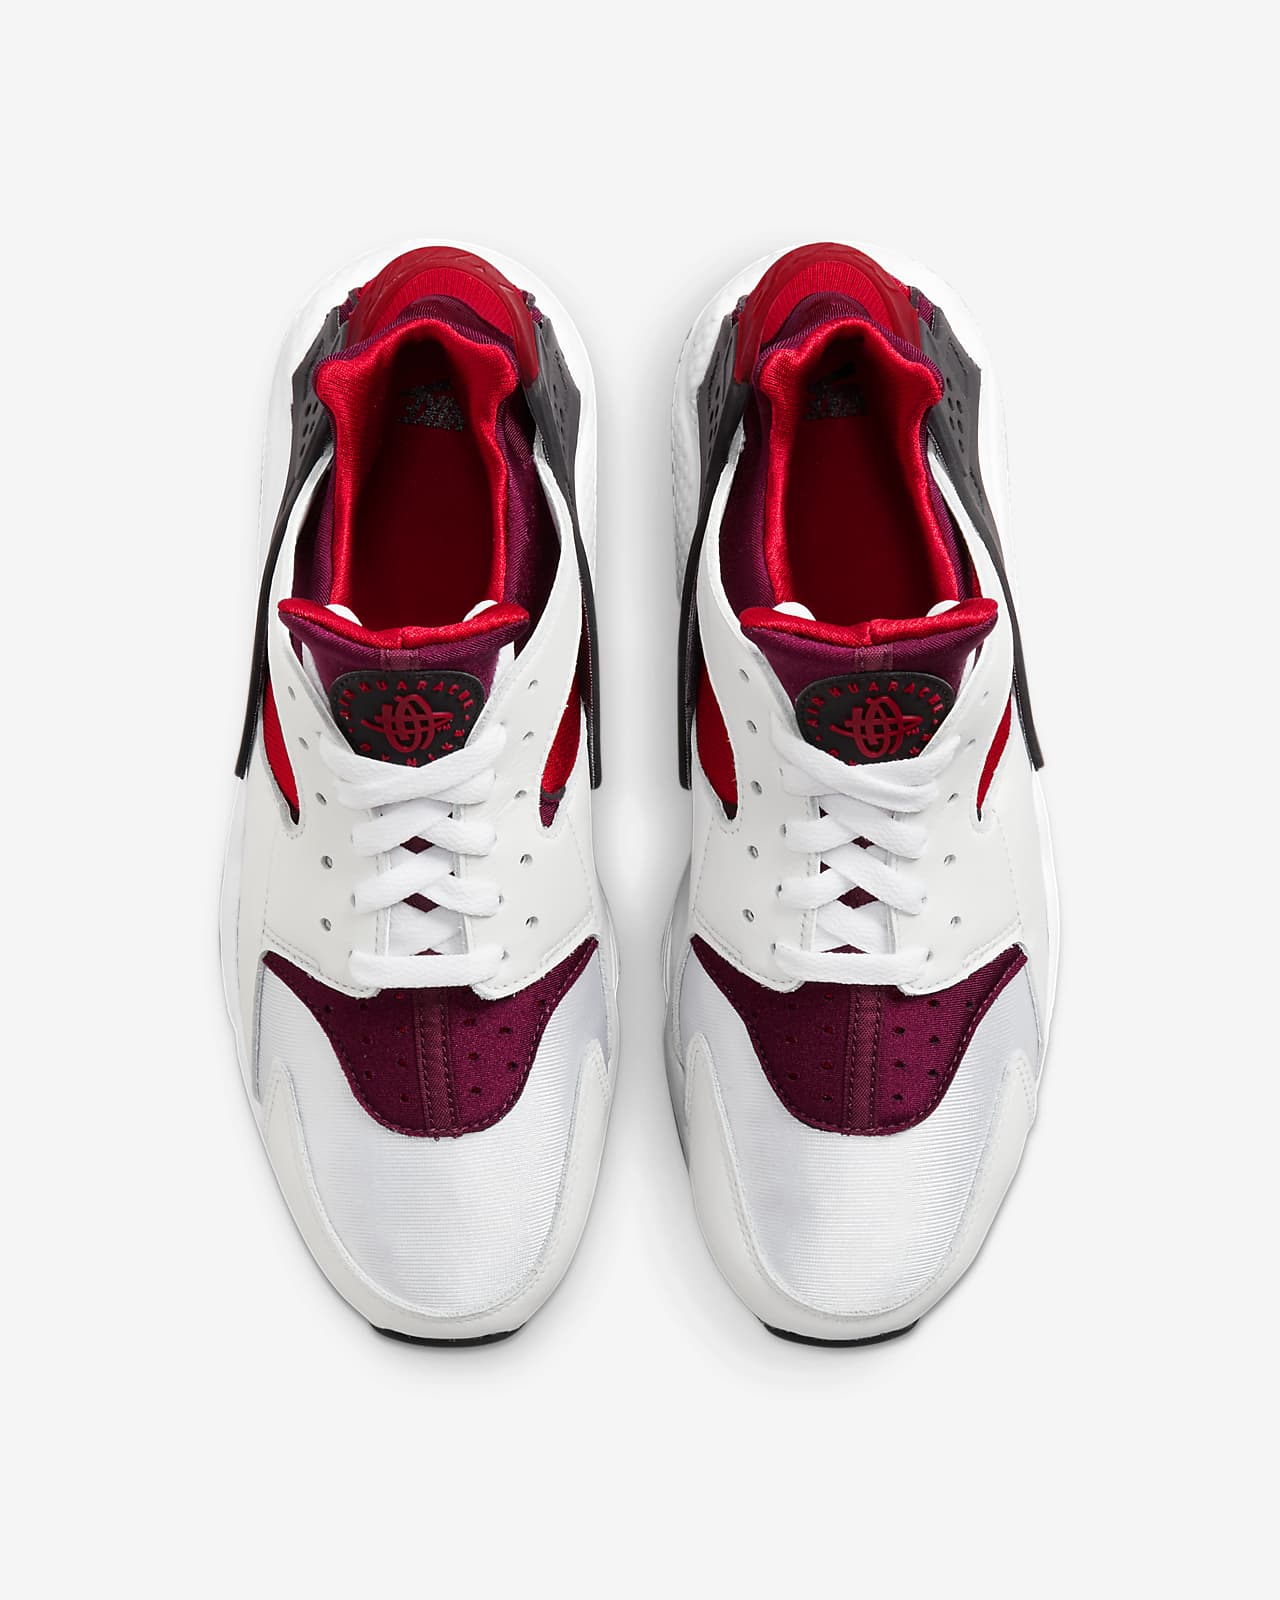 huarache shoes red